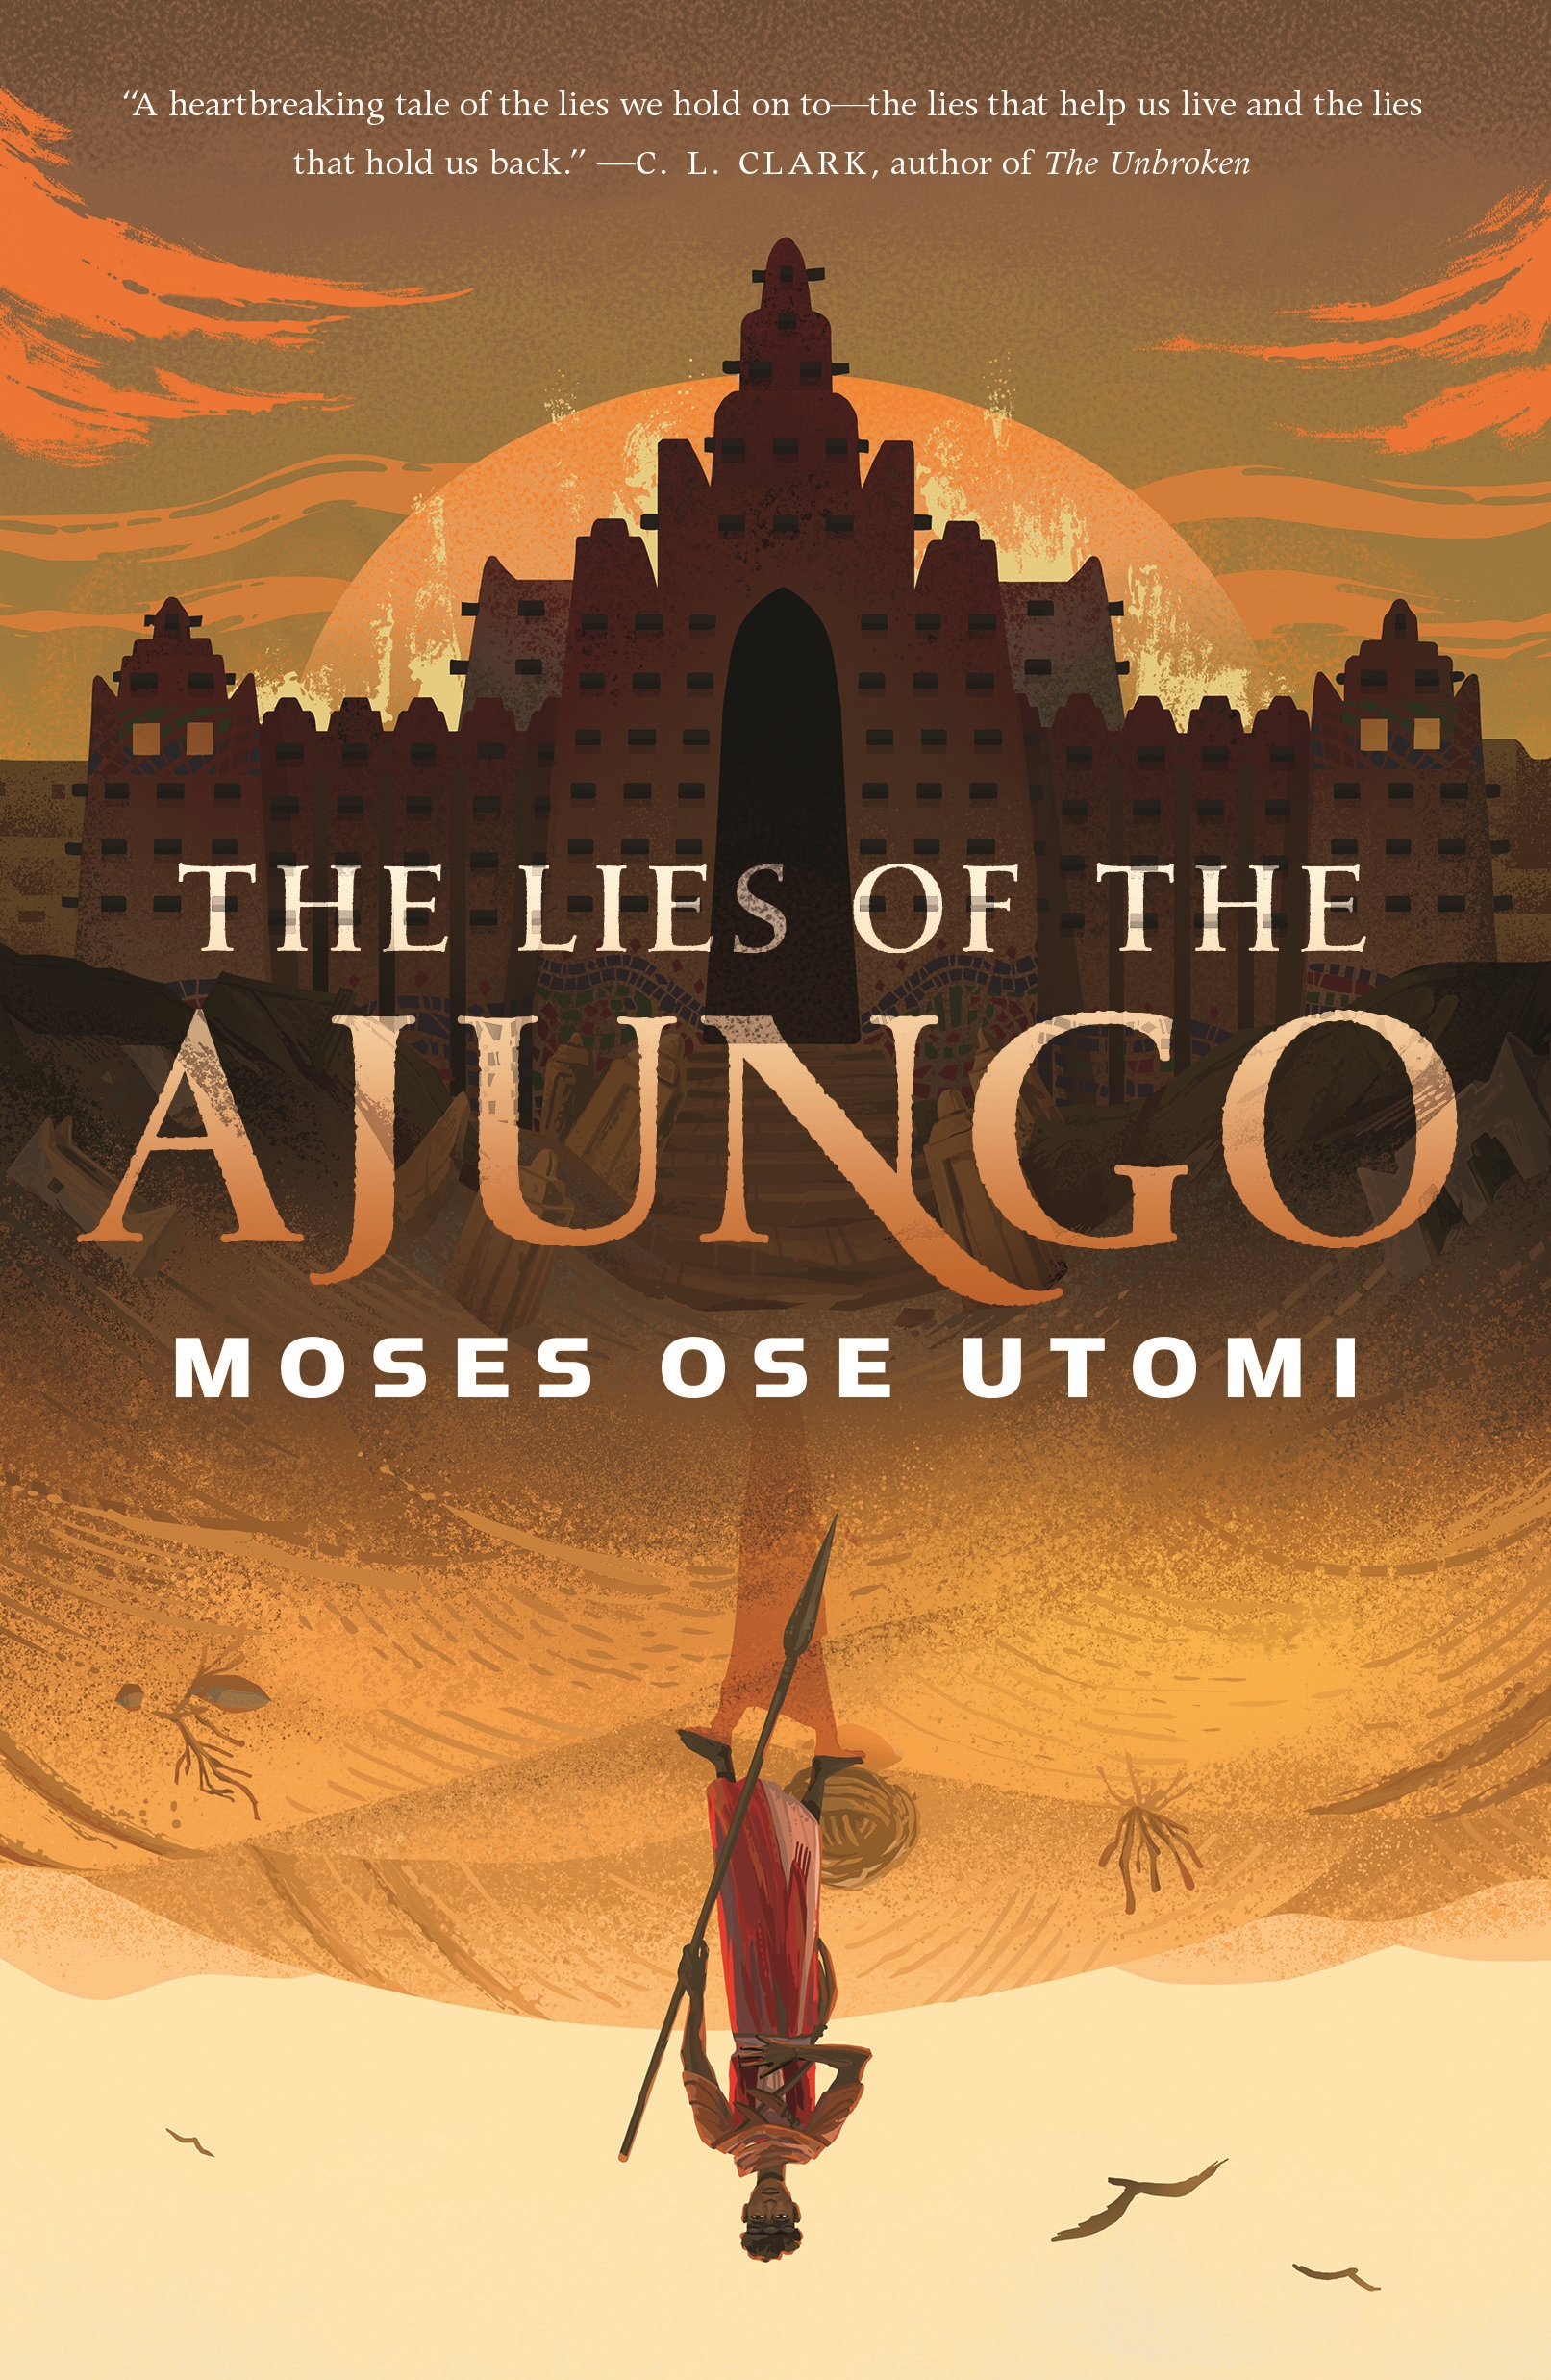 The Lies of the Ajungo by Moses Ose Utomi